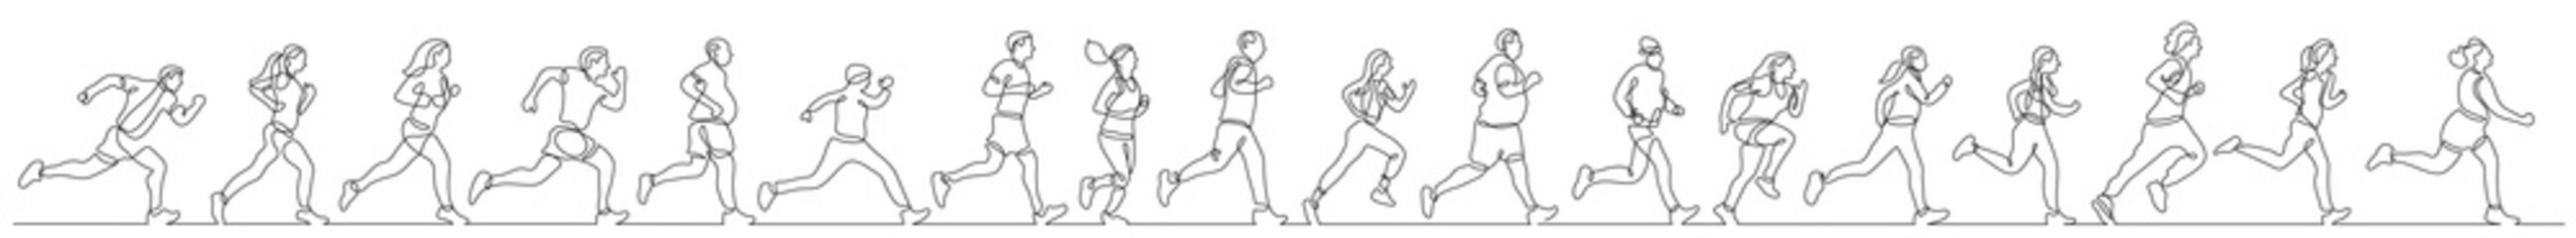 continuous line drawing of group of diverse people exercising running